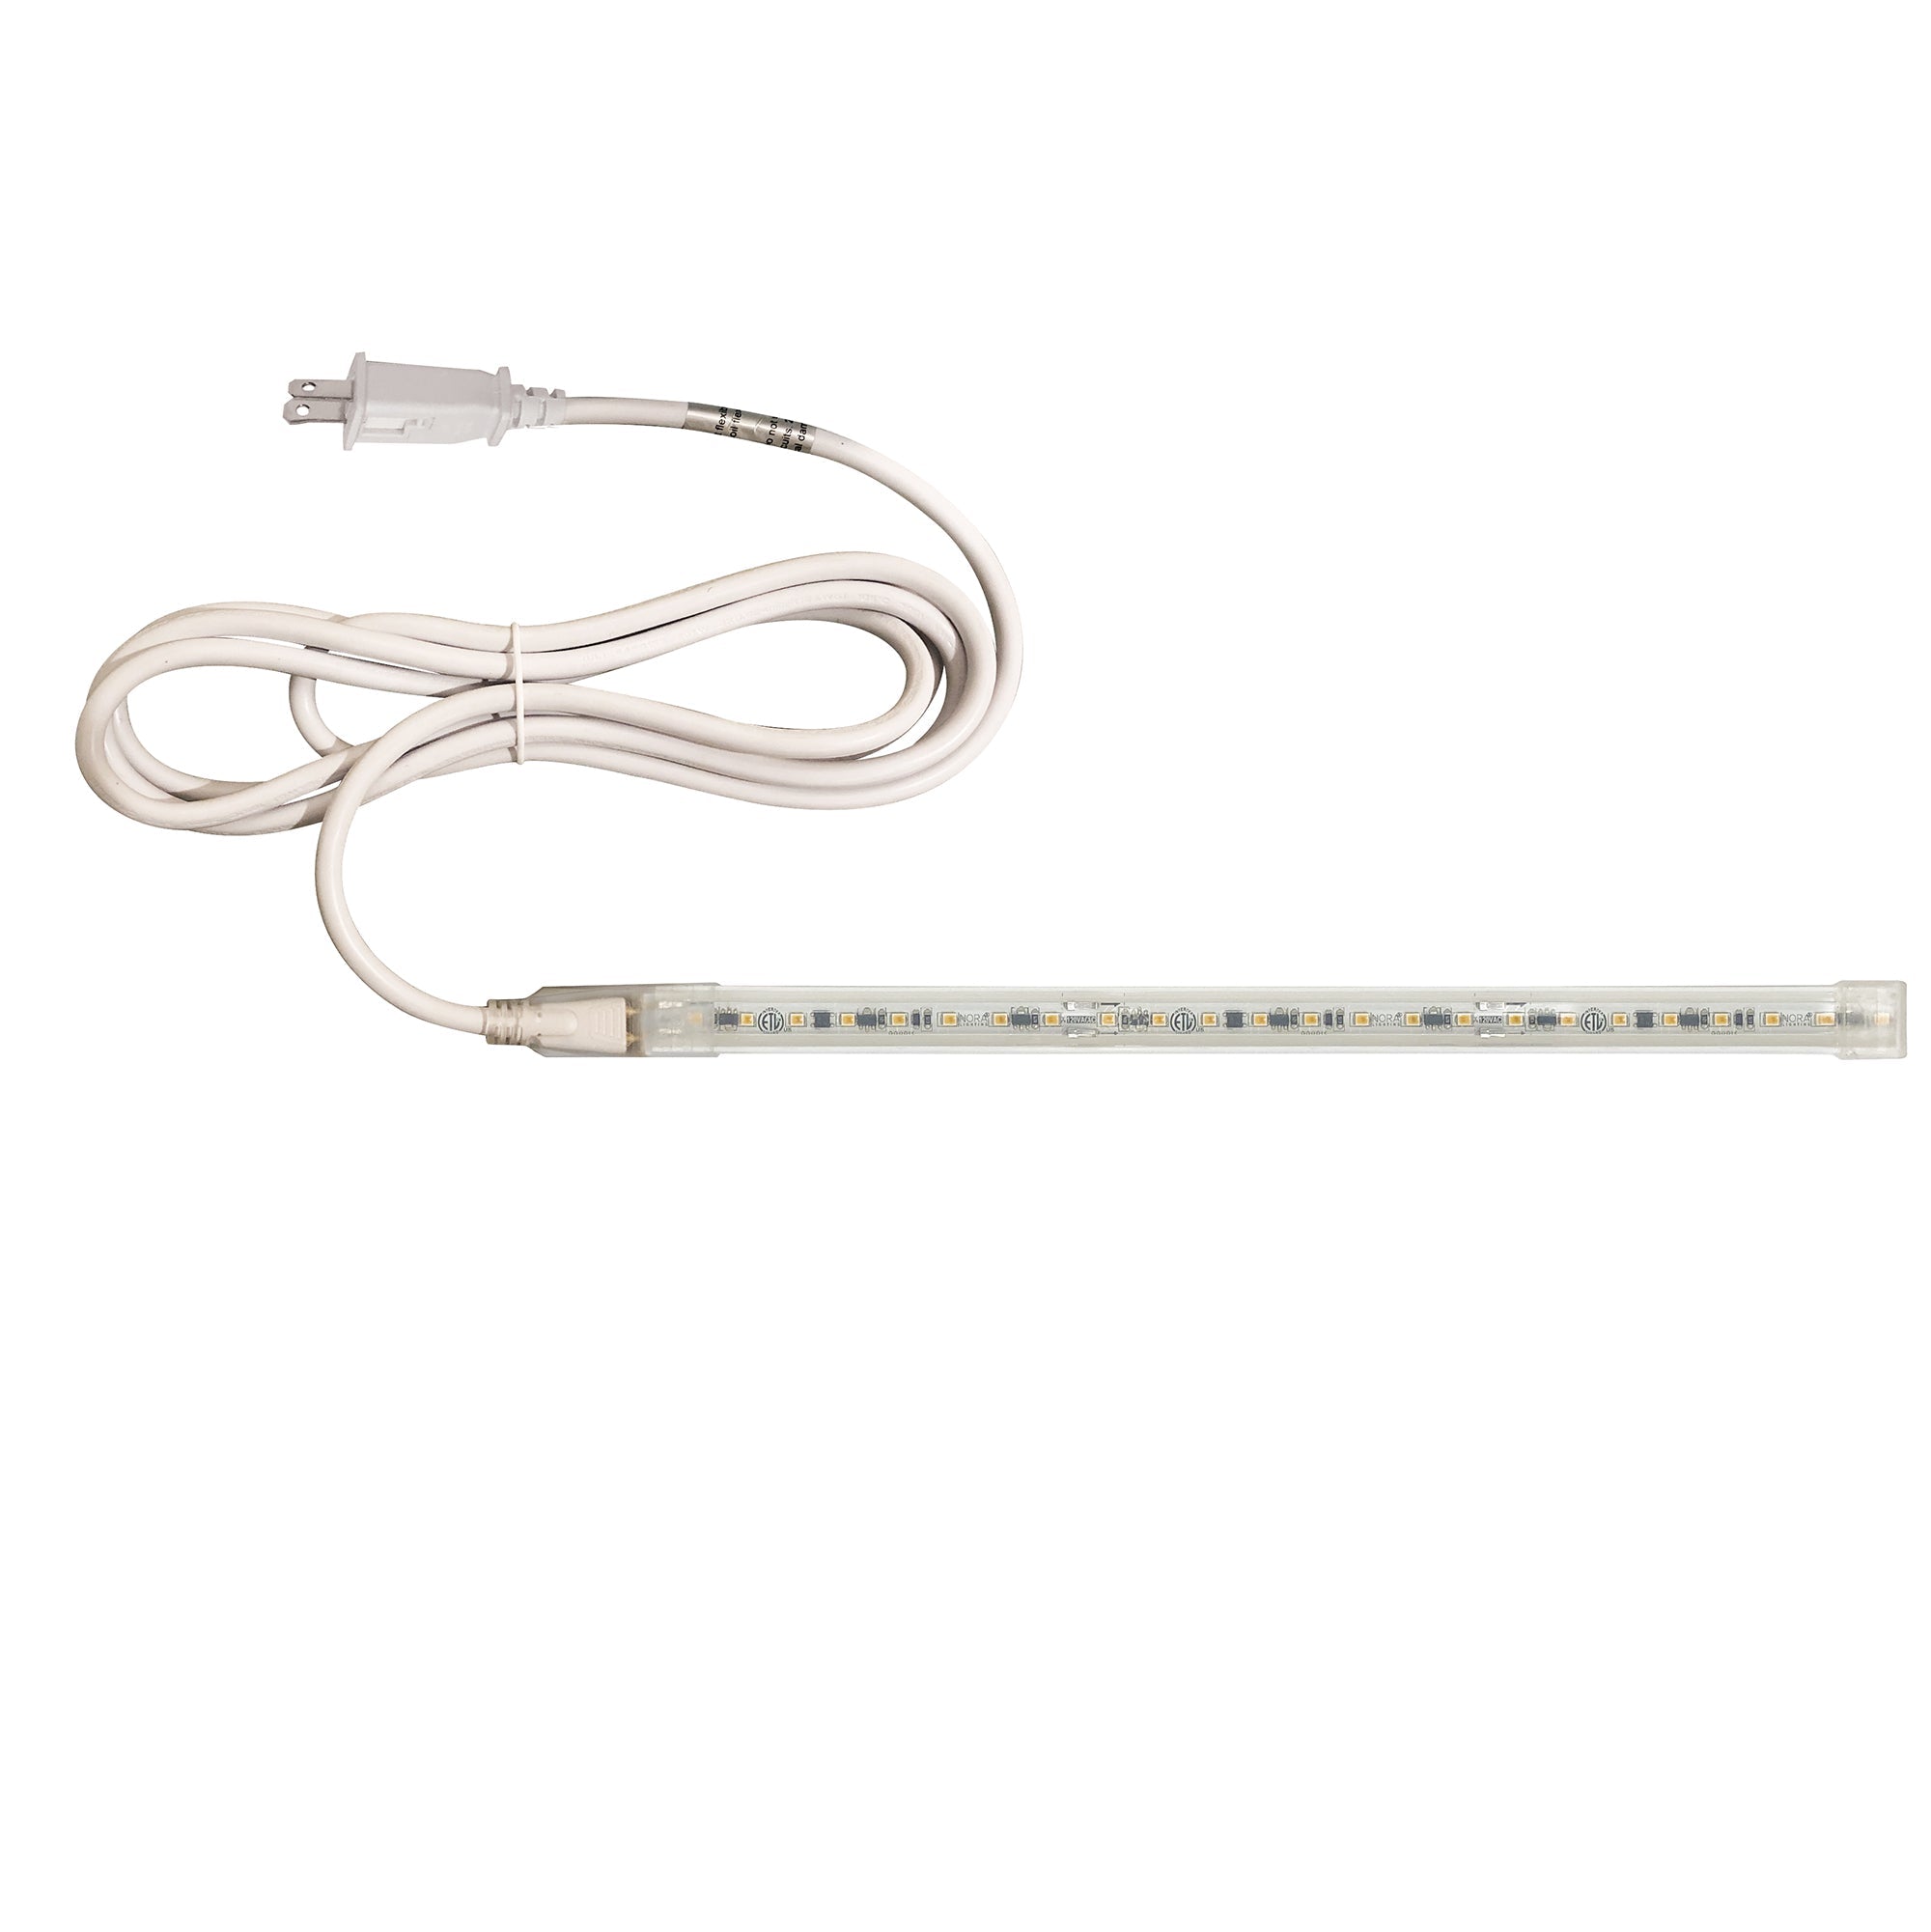 Nora Lighting NUTP13-W11-12-930/CP - Accent / Undercabinet - Custom Cut 11-ft 120V Continuous LED Tape Light, 330lm / 3.6W per foot, 3000K, w/ Mounting Clips and 8' Cord & Plug